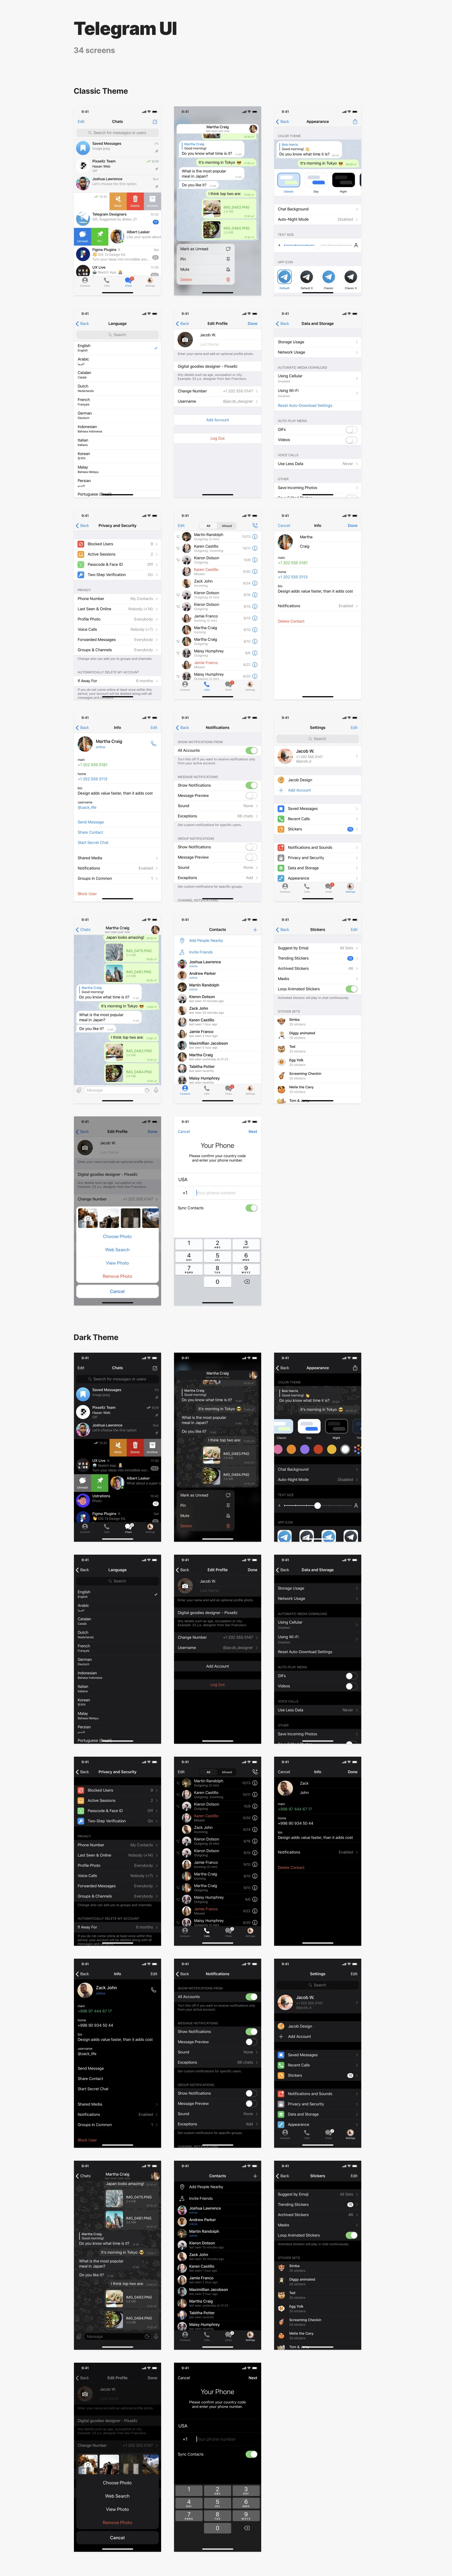 Mobile Apps Library for Sketch & Figma - 120+ reconstructed screens of popular mobile apps: Instagram, Telegram, Messenger, WhatsApp. Compatible with Sketch App & Figma.